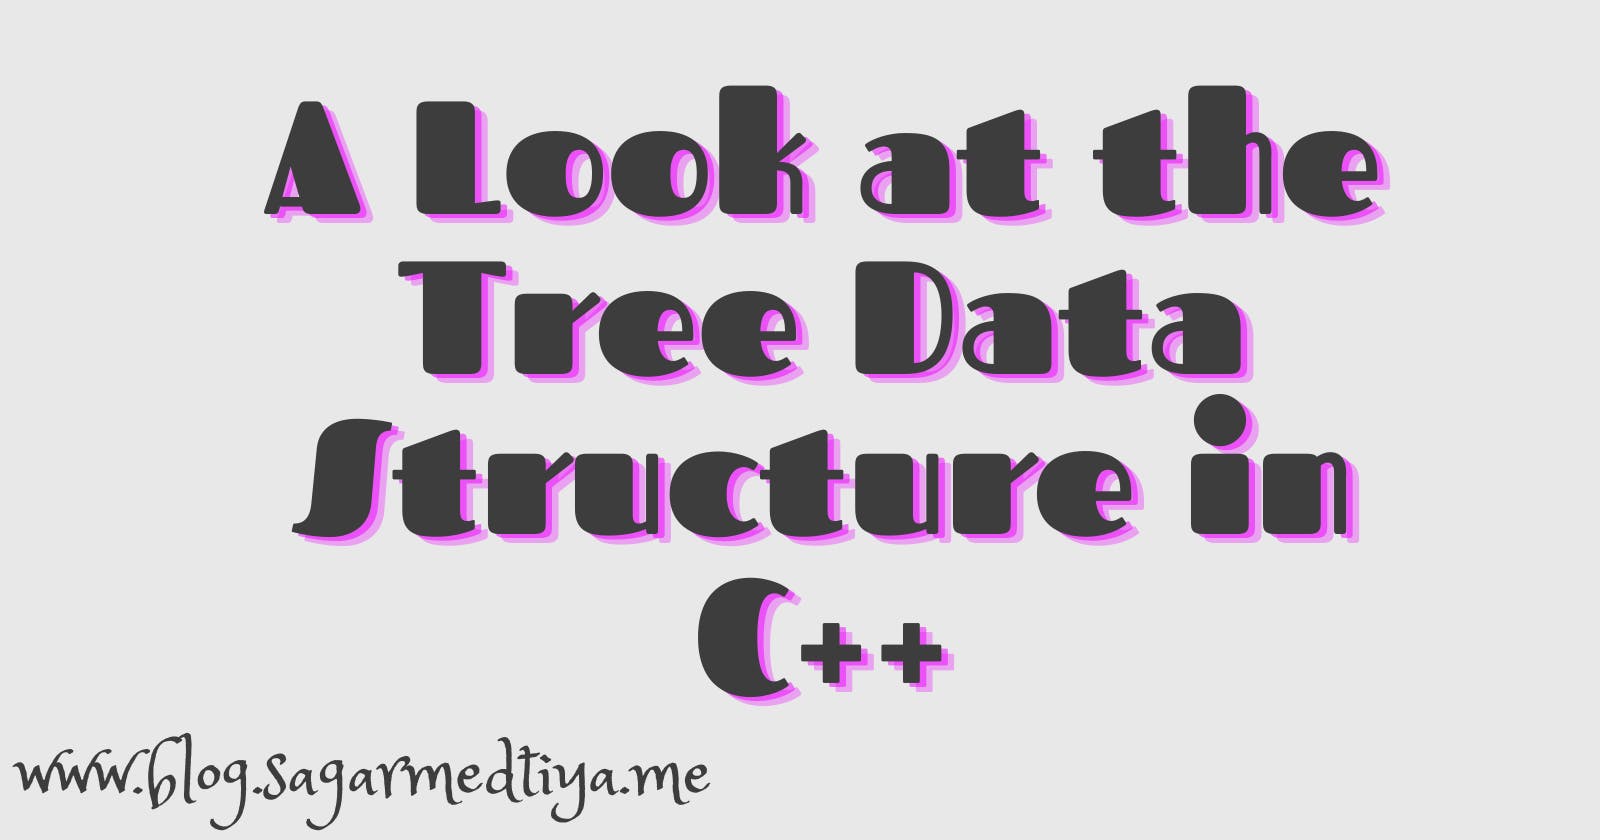 Tree Data Structure in C++